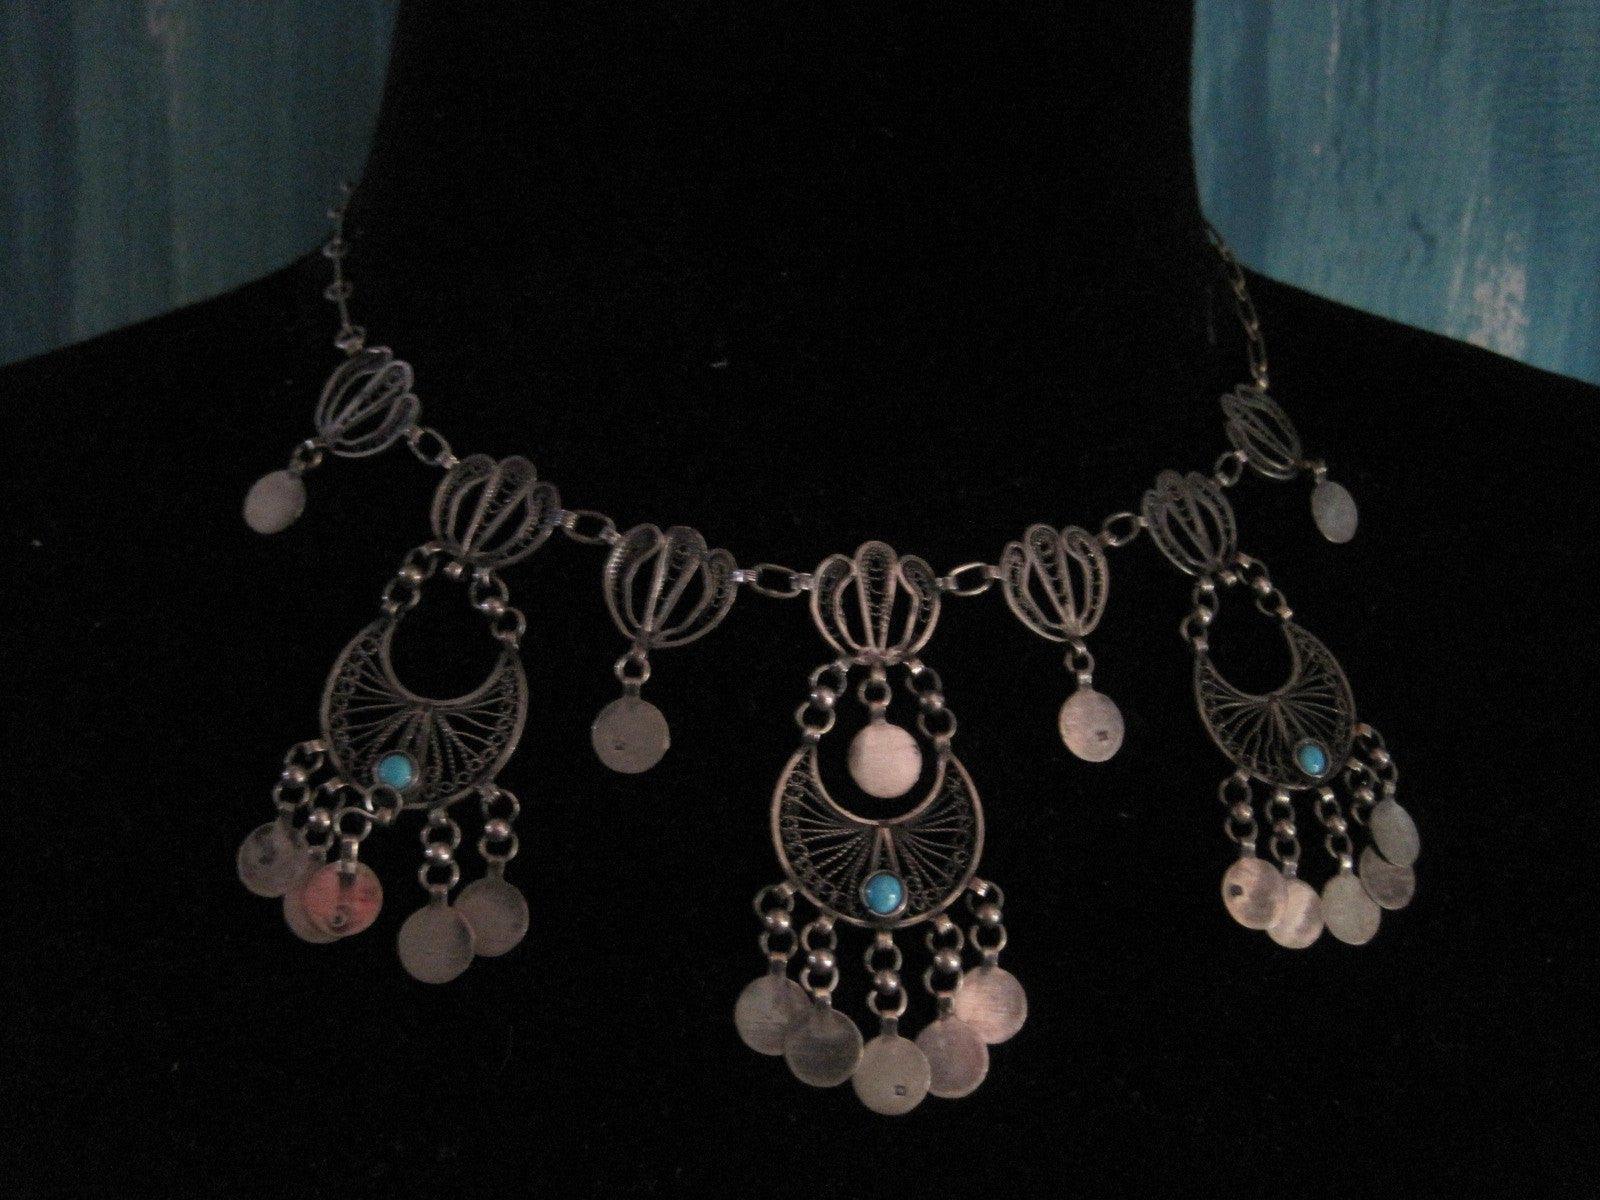 Vintage Silver and Turquoise Pretty Egyptian Choker Necklace with Coin Dangles - Anteeka